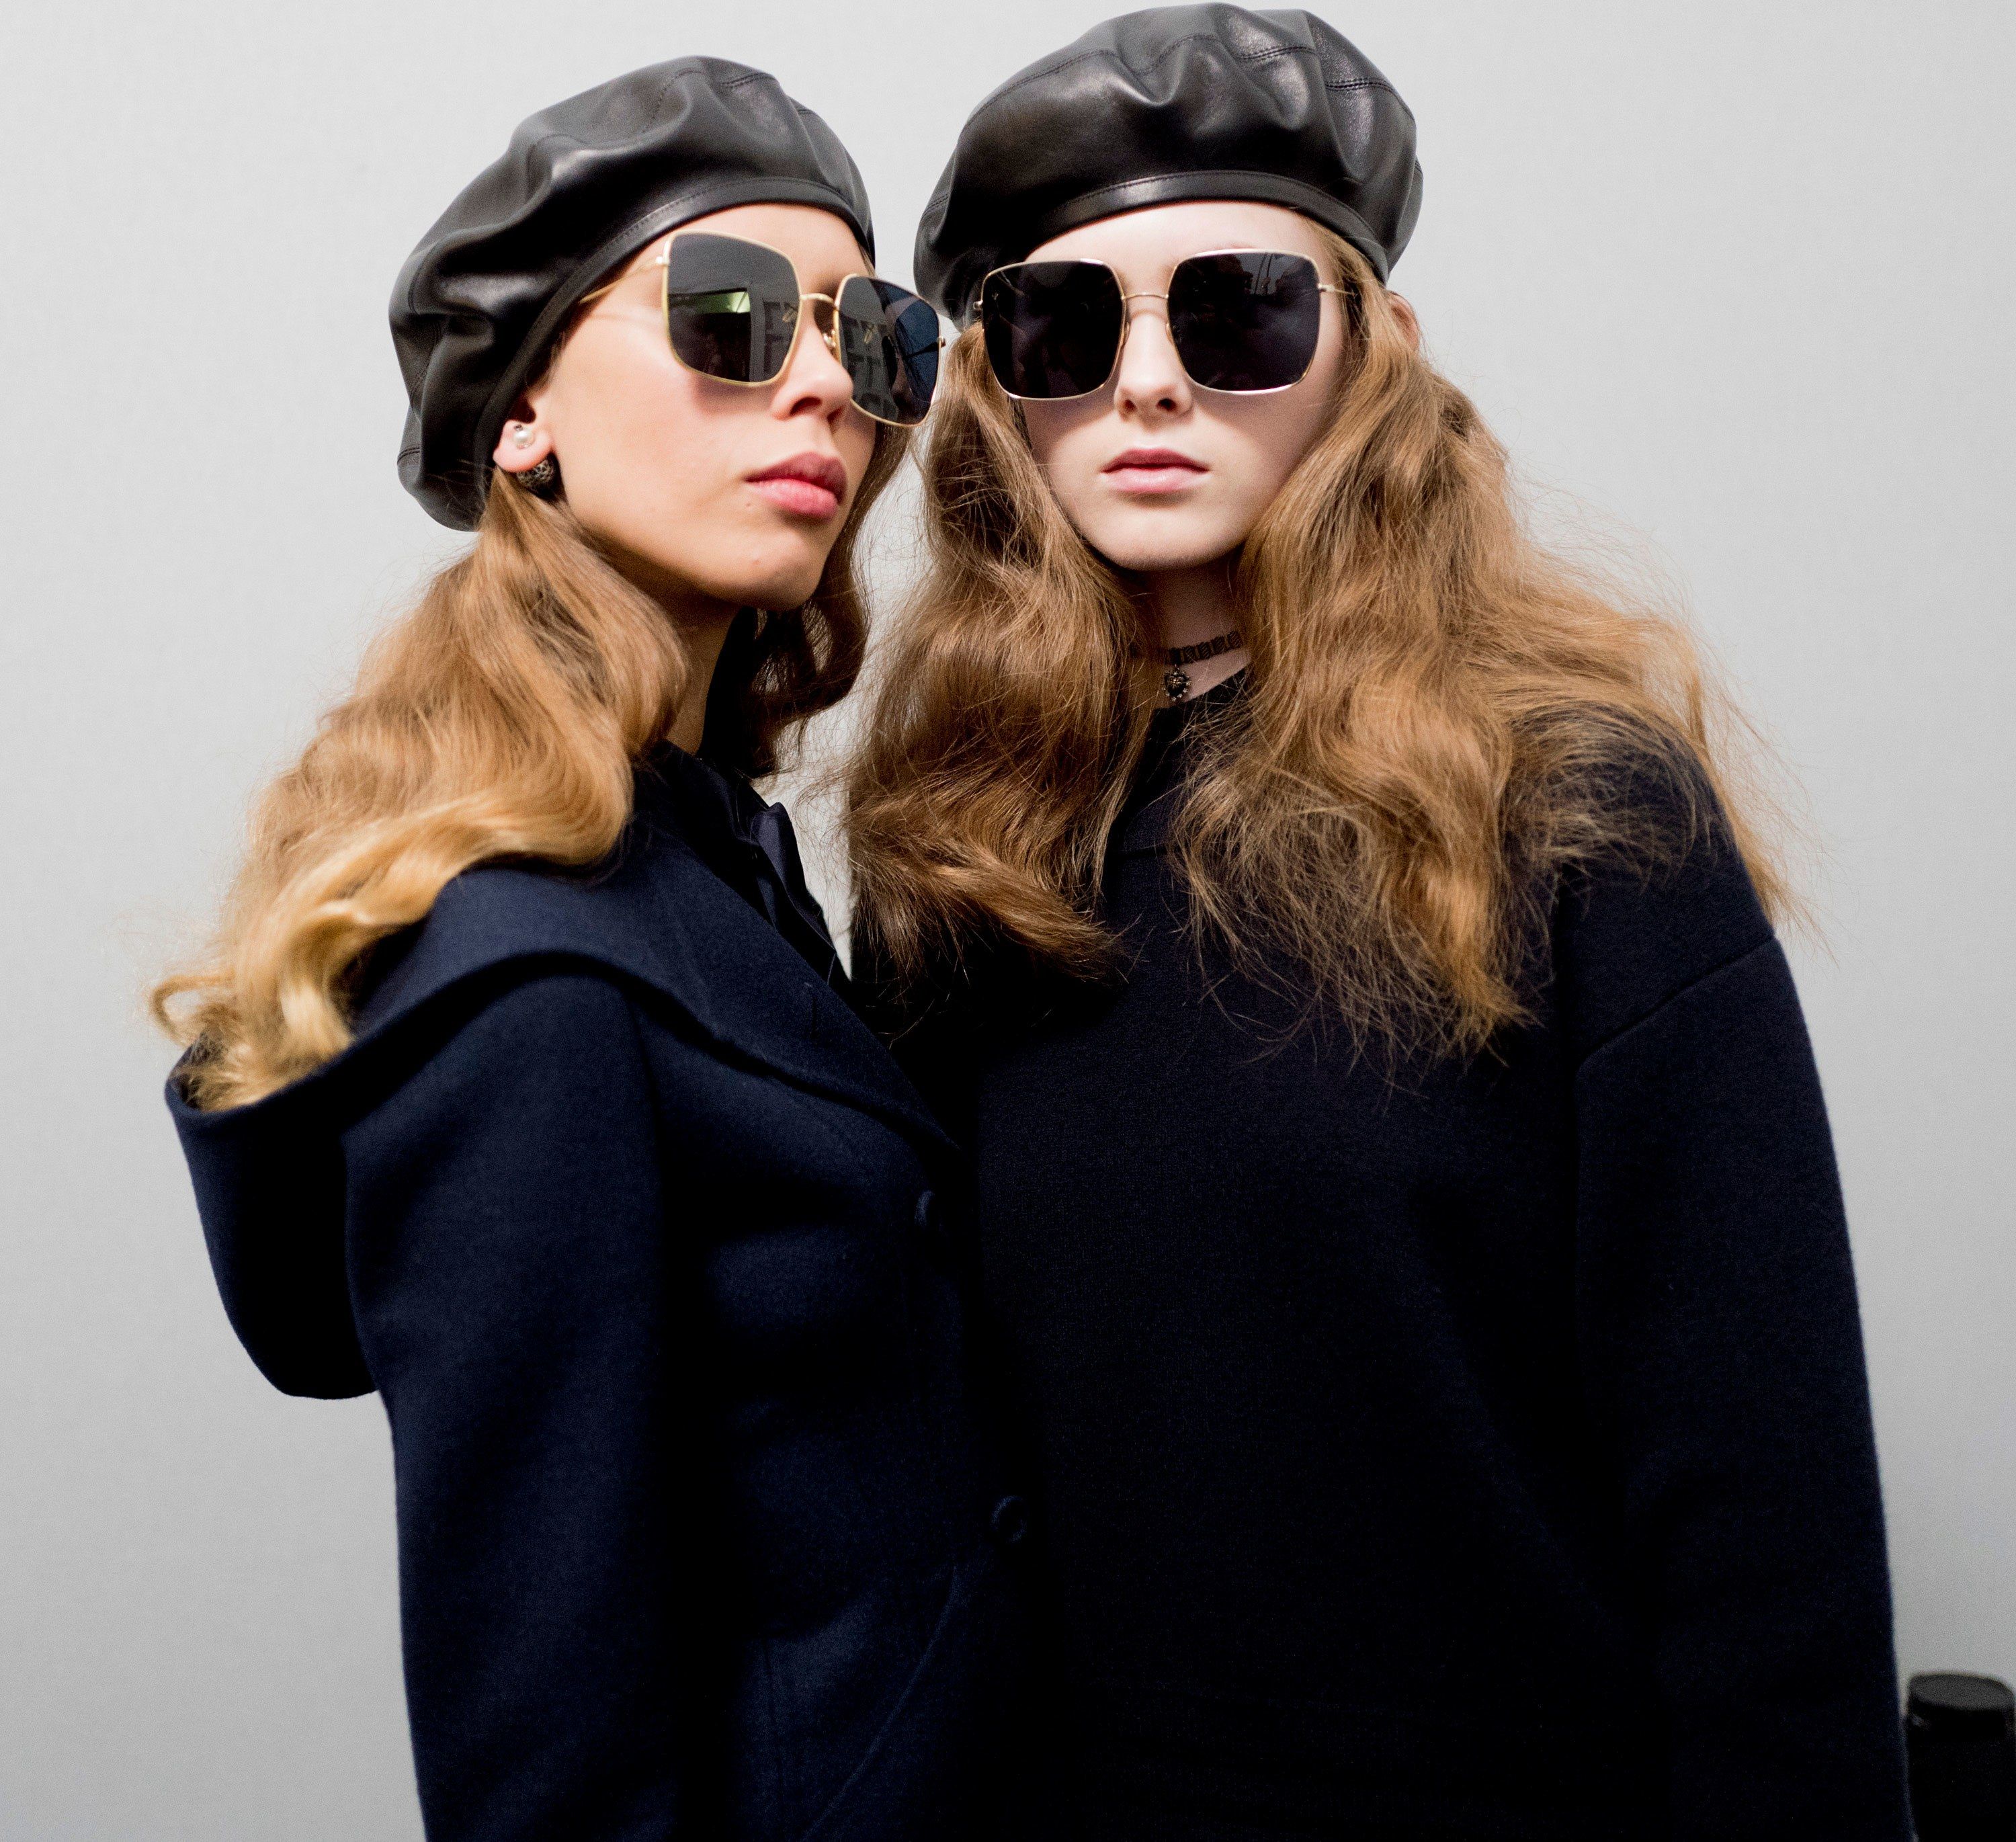 Trend to try: Berets for that Parisian-chic look